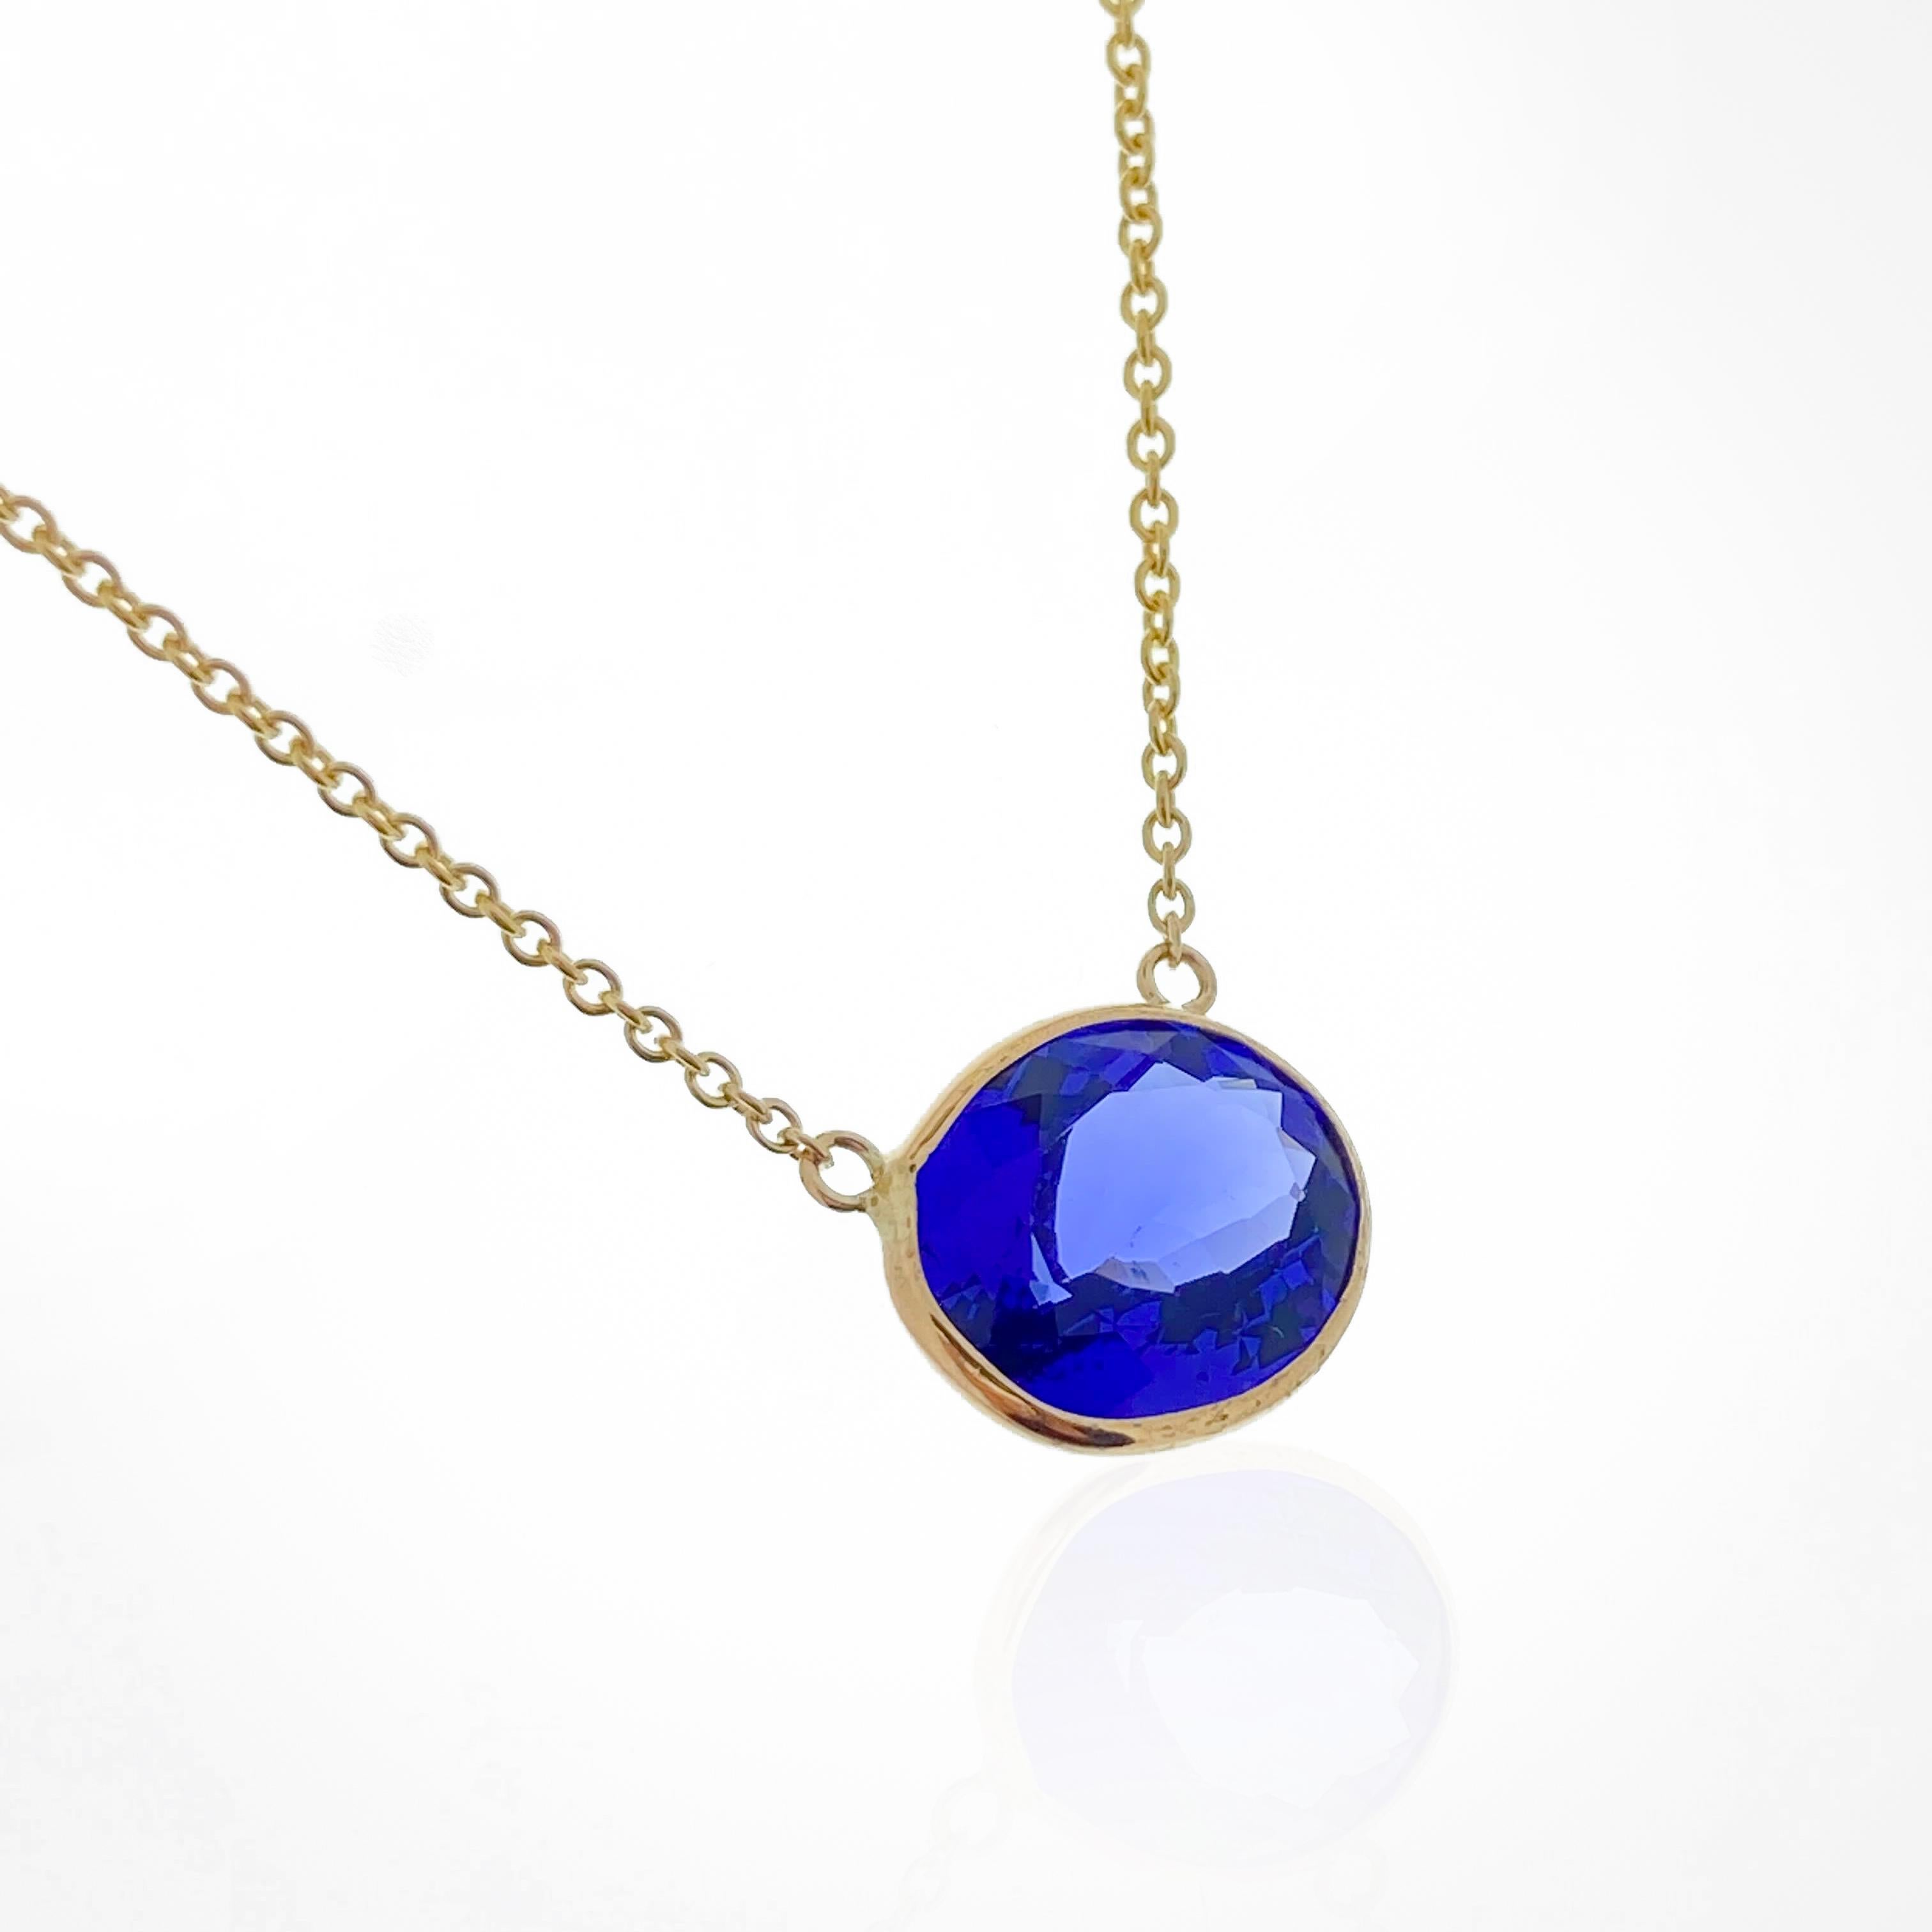 Contemporary 4.13 Carat Oval Blue Tanzanite Fashion Necklaces In 14k Yellow Gold  For Sale